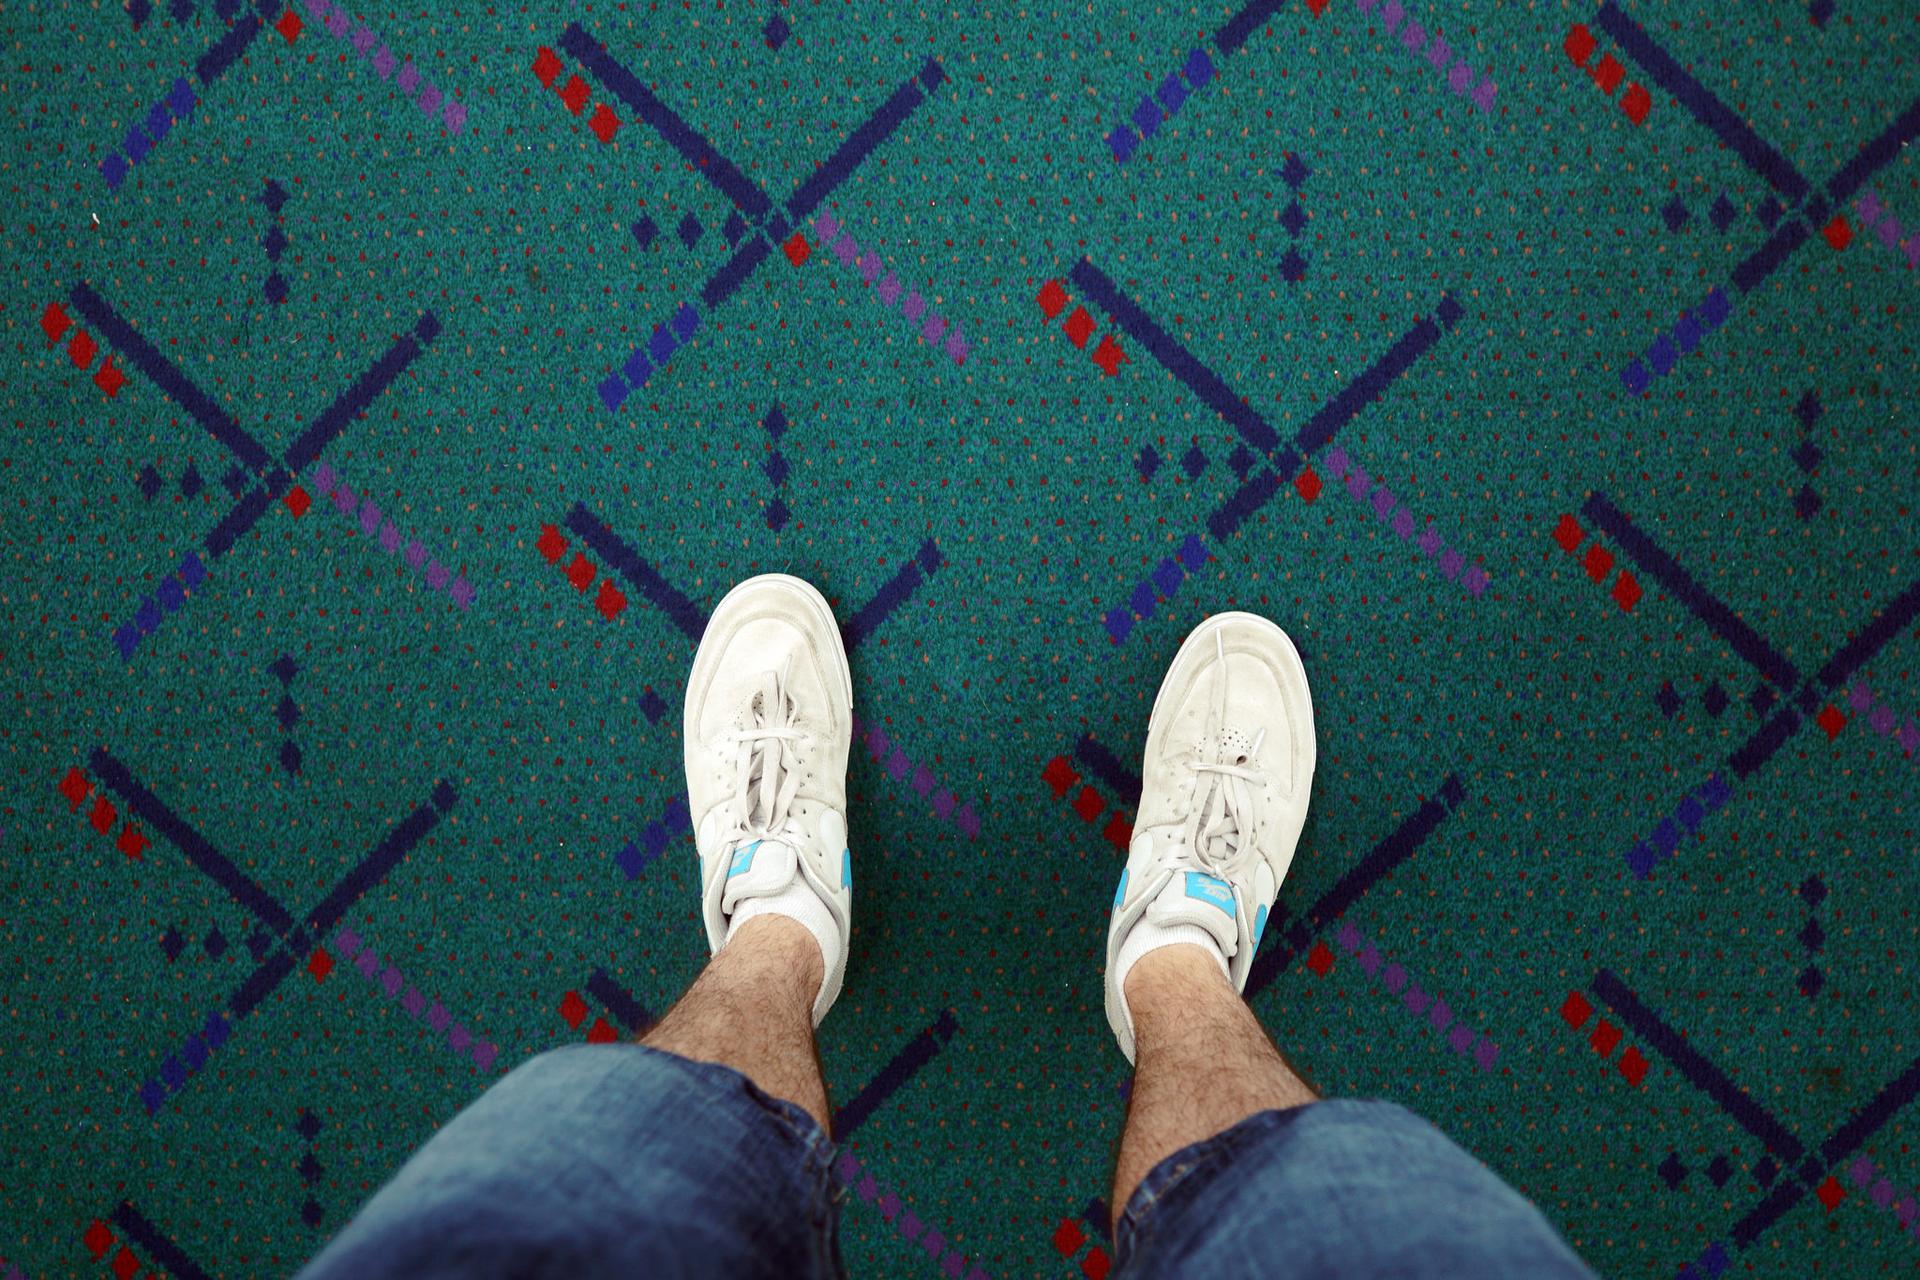 Standing on the soon-to-be-removed carpet at Portland's airport.